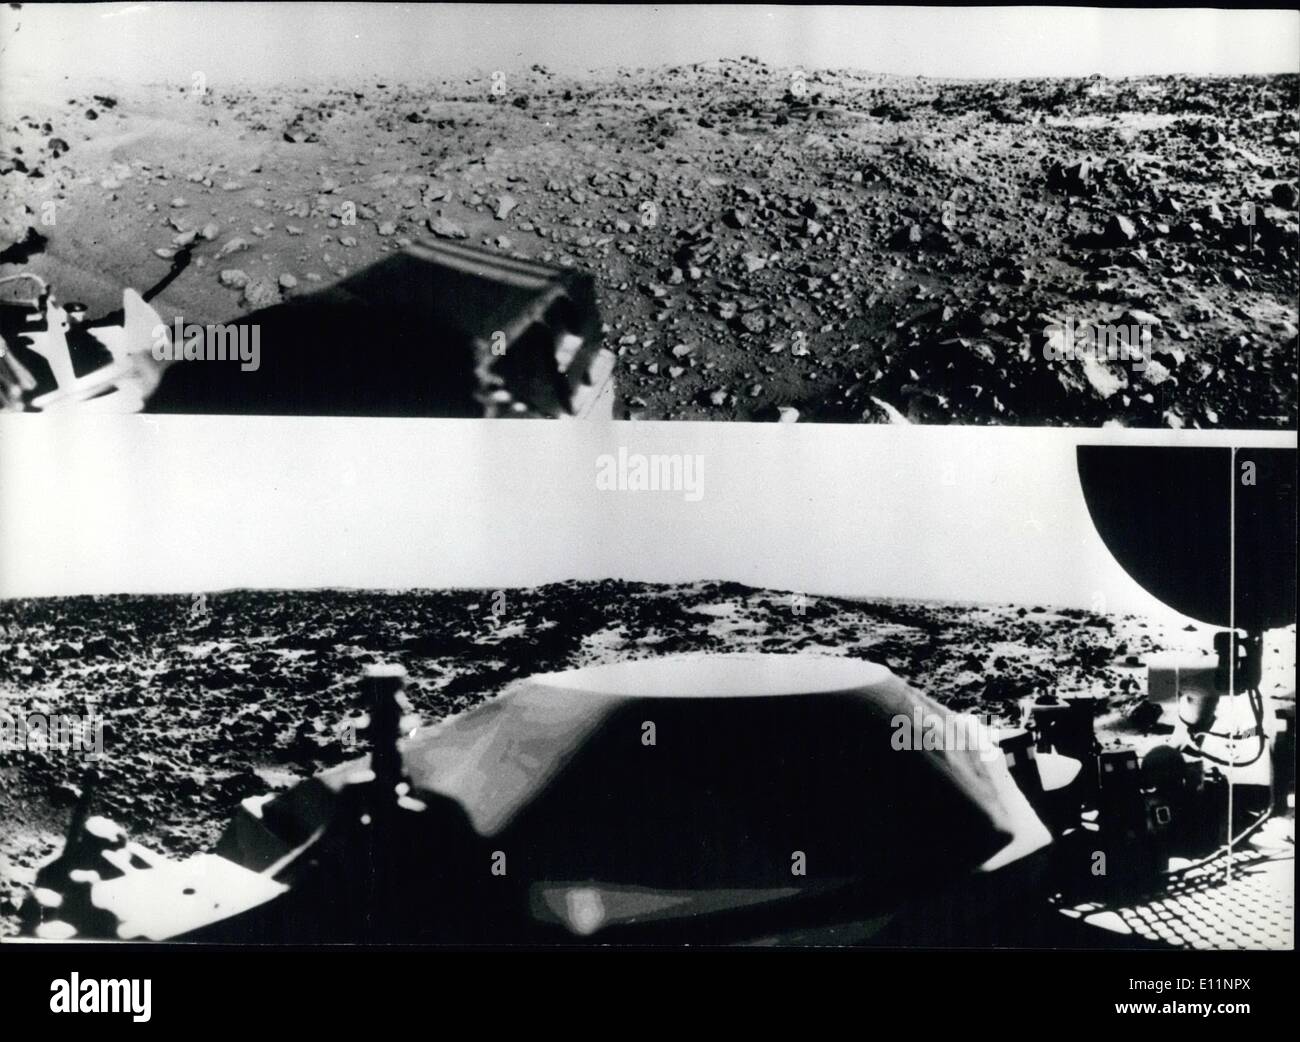 Jul. 07, 1979 - First Picture Of The Red Planet Mars: Th first panoramic view by Viking 1 from the surface of Mars Top-half They out-of-focus space craft component towards left center is the housing for the viking sample arm, which is not yet deployed: Bottom can be seen the low gain antenna from receipt of commands from Earth, The projections on or near the horizon Amy represent the rime distant impact craters. Stock Photo